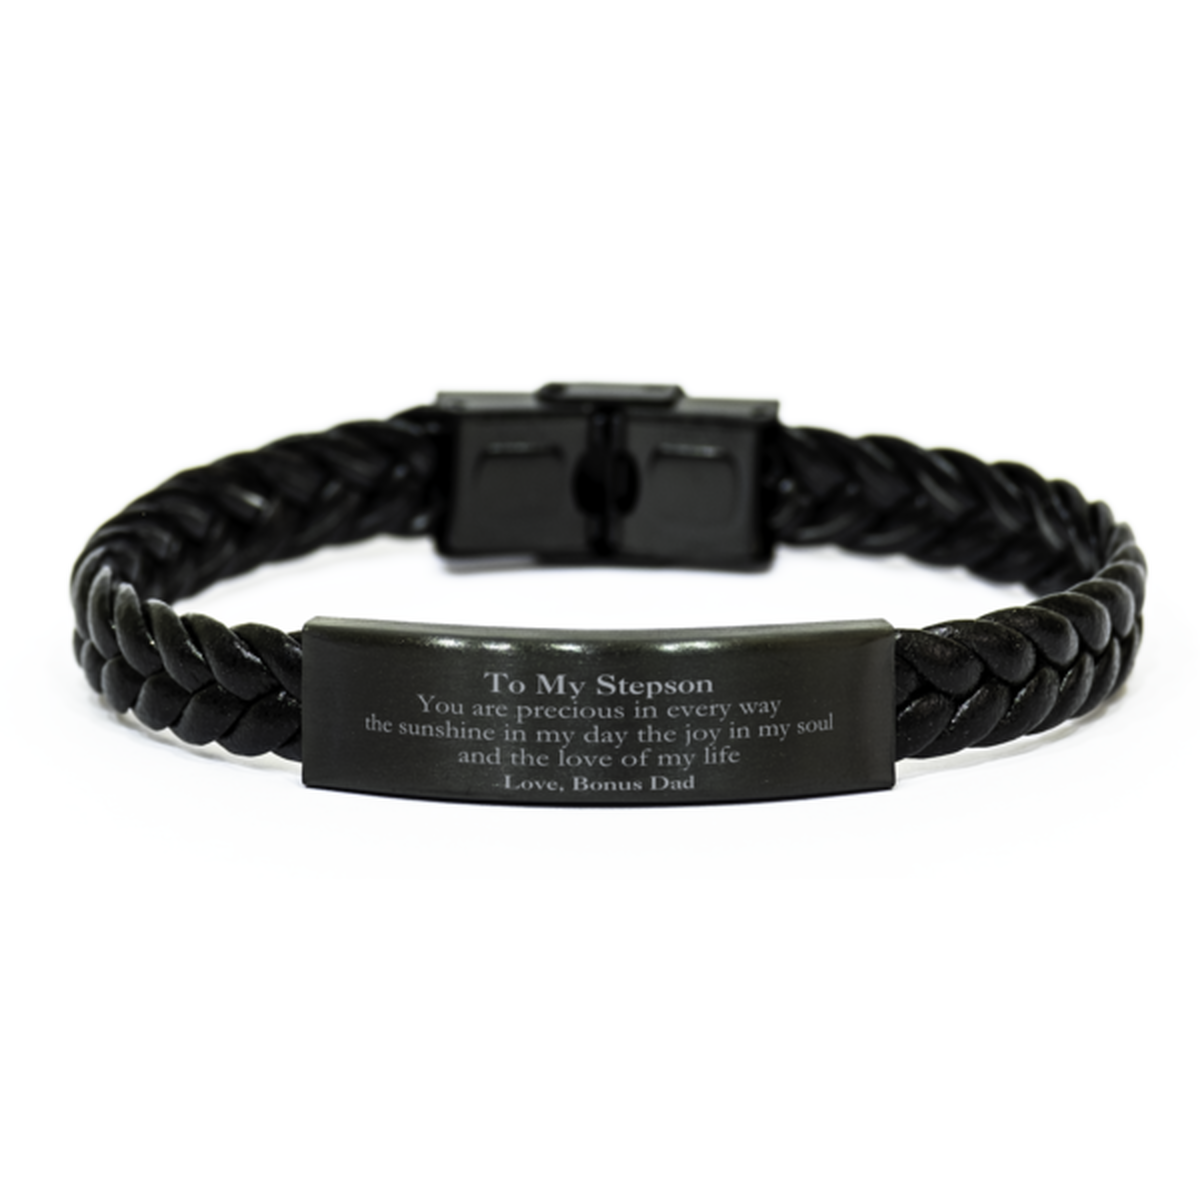 Graduation Gifts for Stepson Braided Leather Bracelet Present from Bonus Dad, Christmas Stepson Birthday Gifts Stepson You are precious in every way the sunshine in my day. Love, Bonus Dad